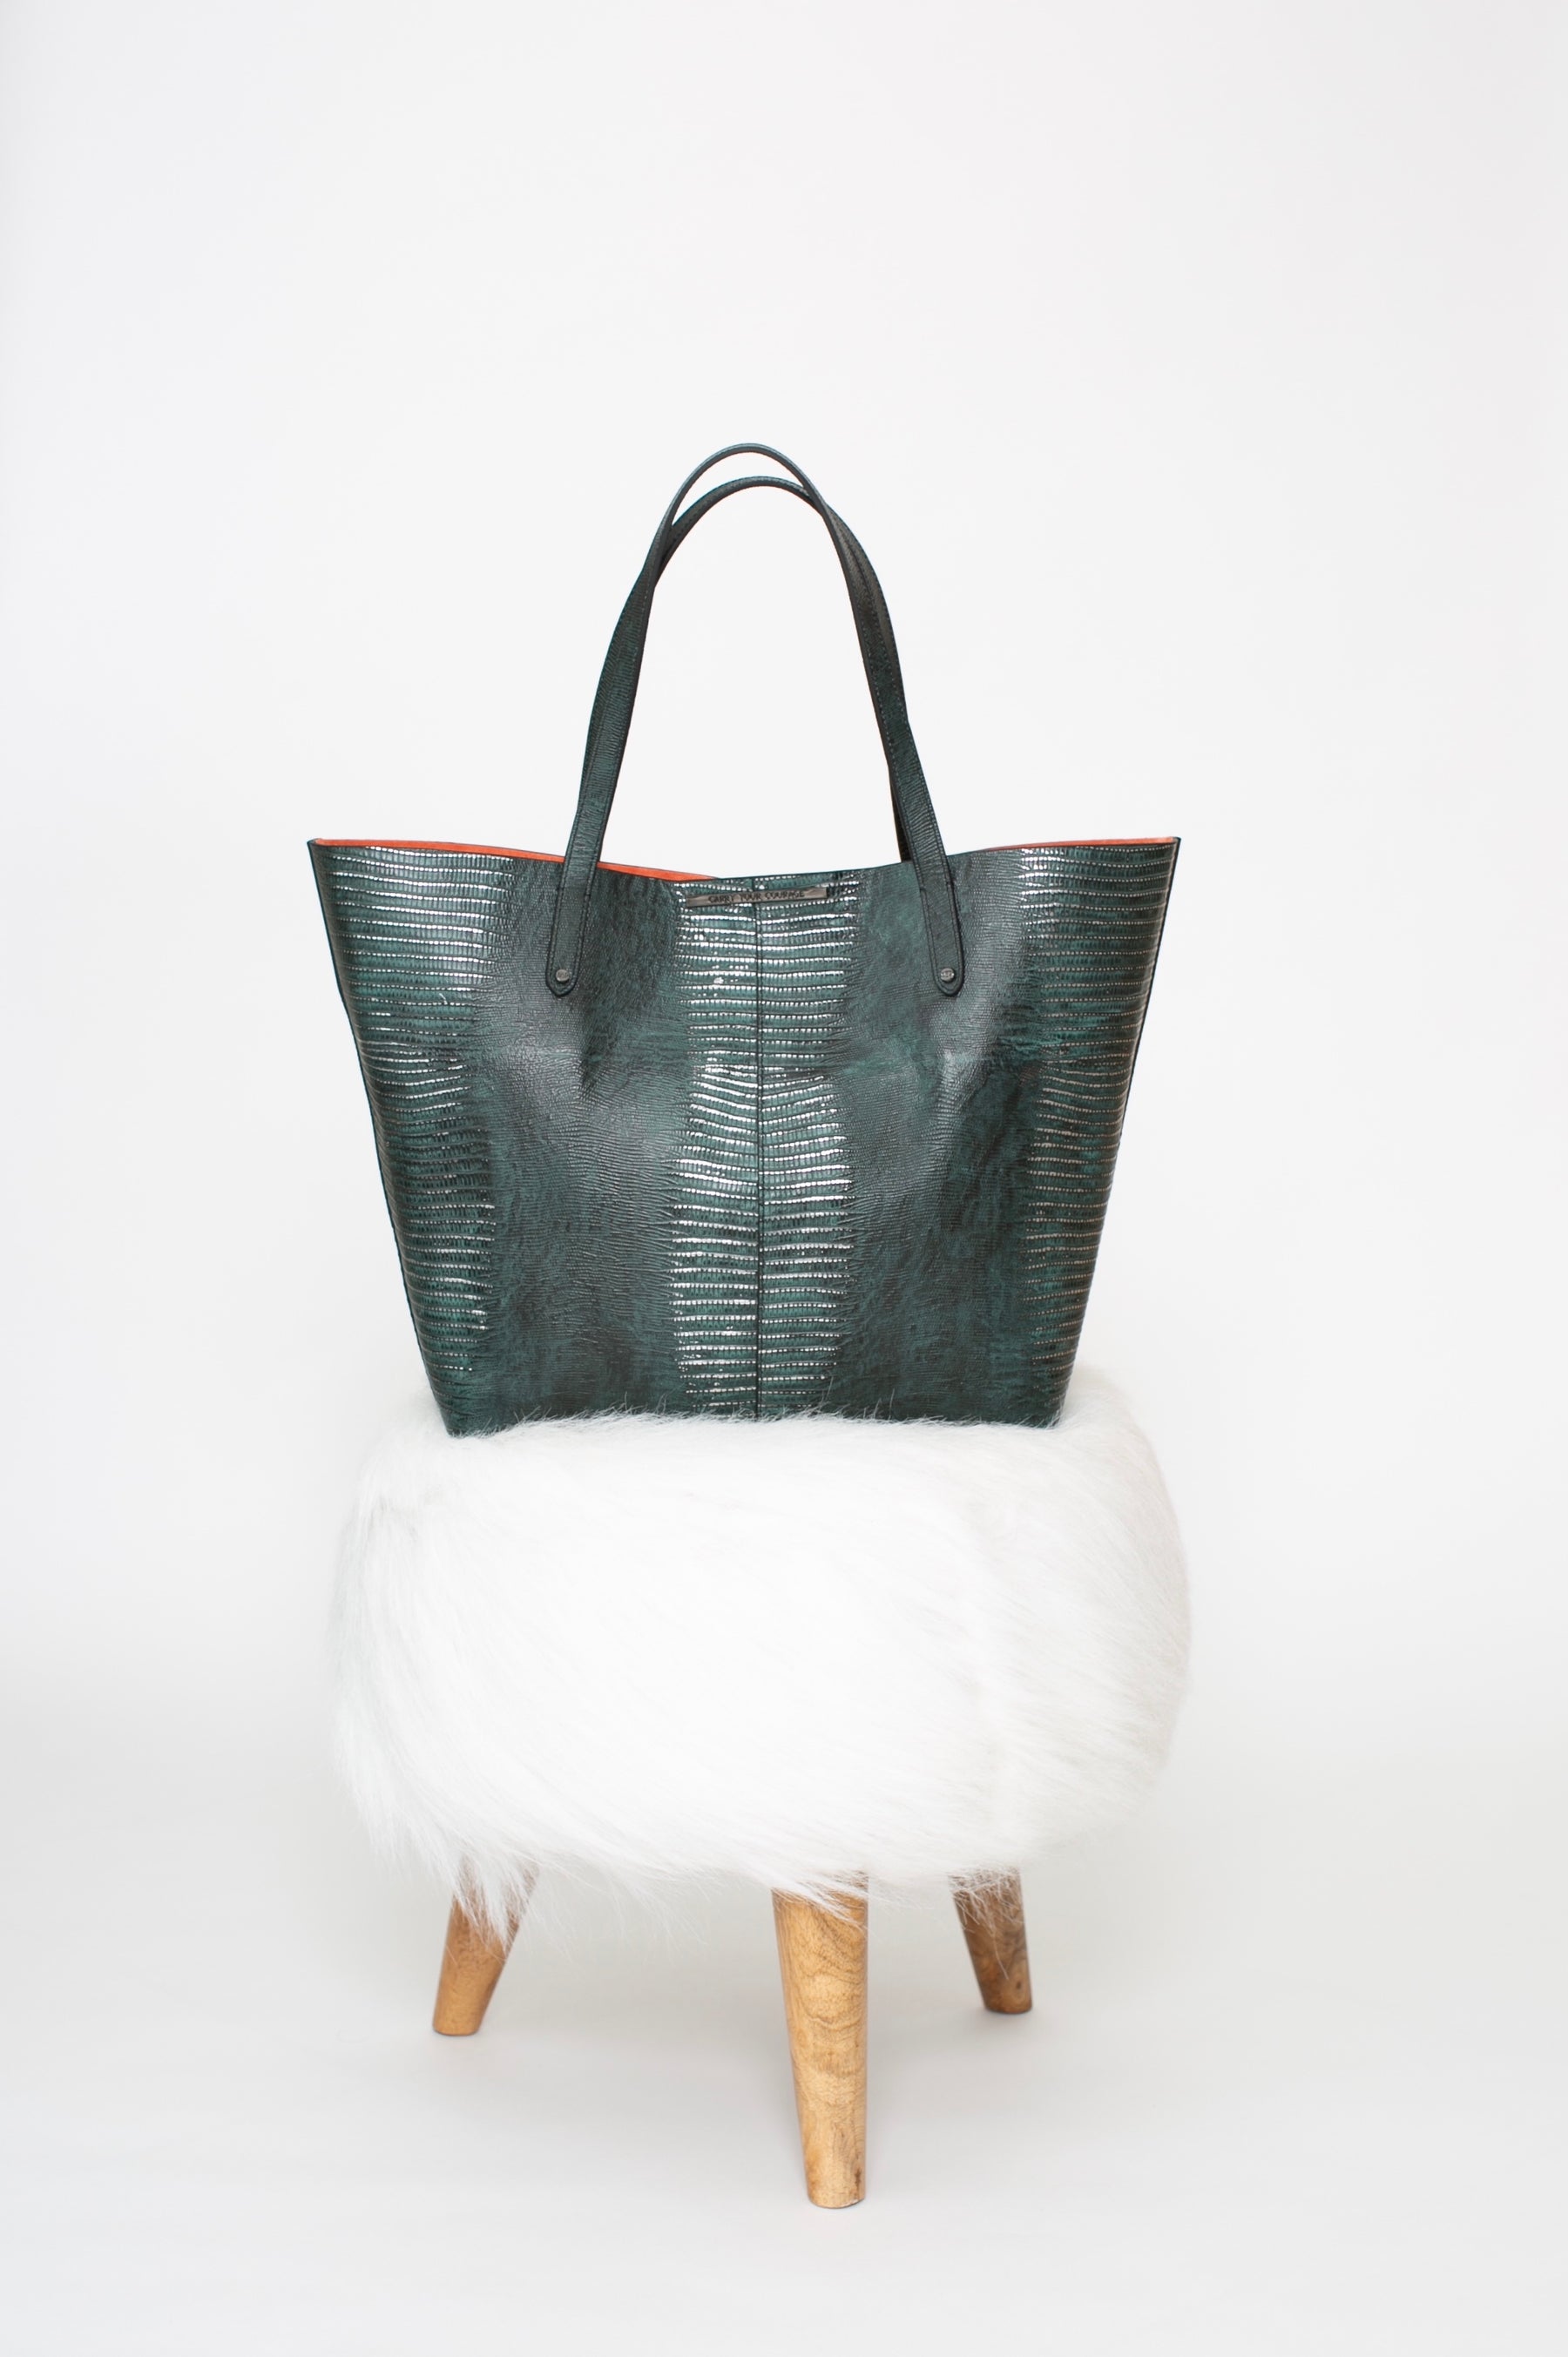 Wren & Roch - the Rise tote on white stool